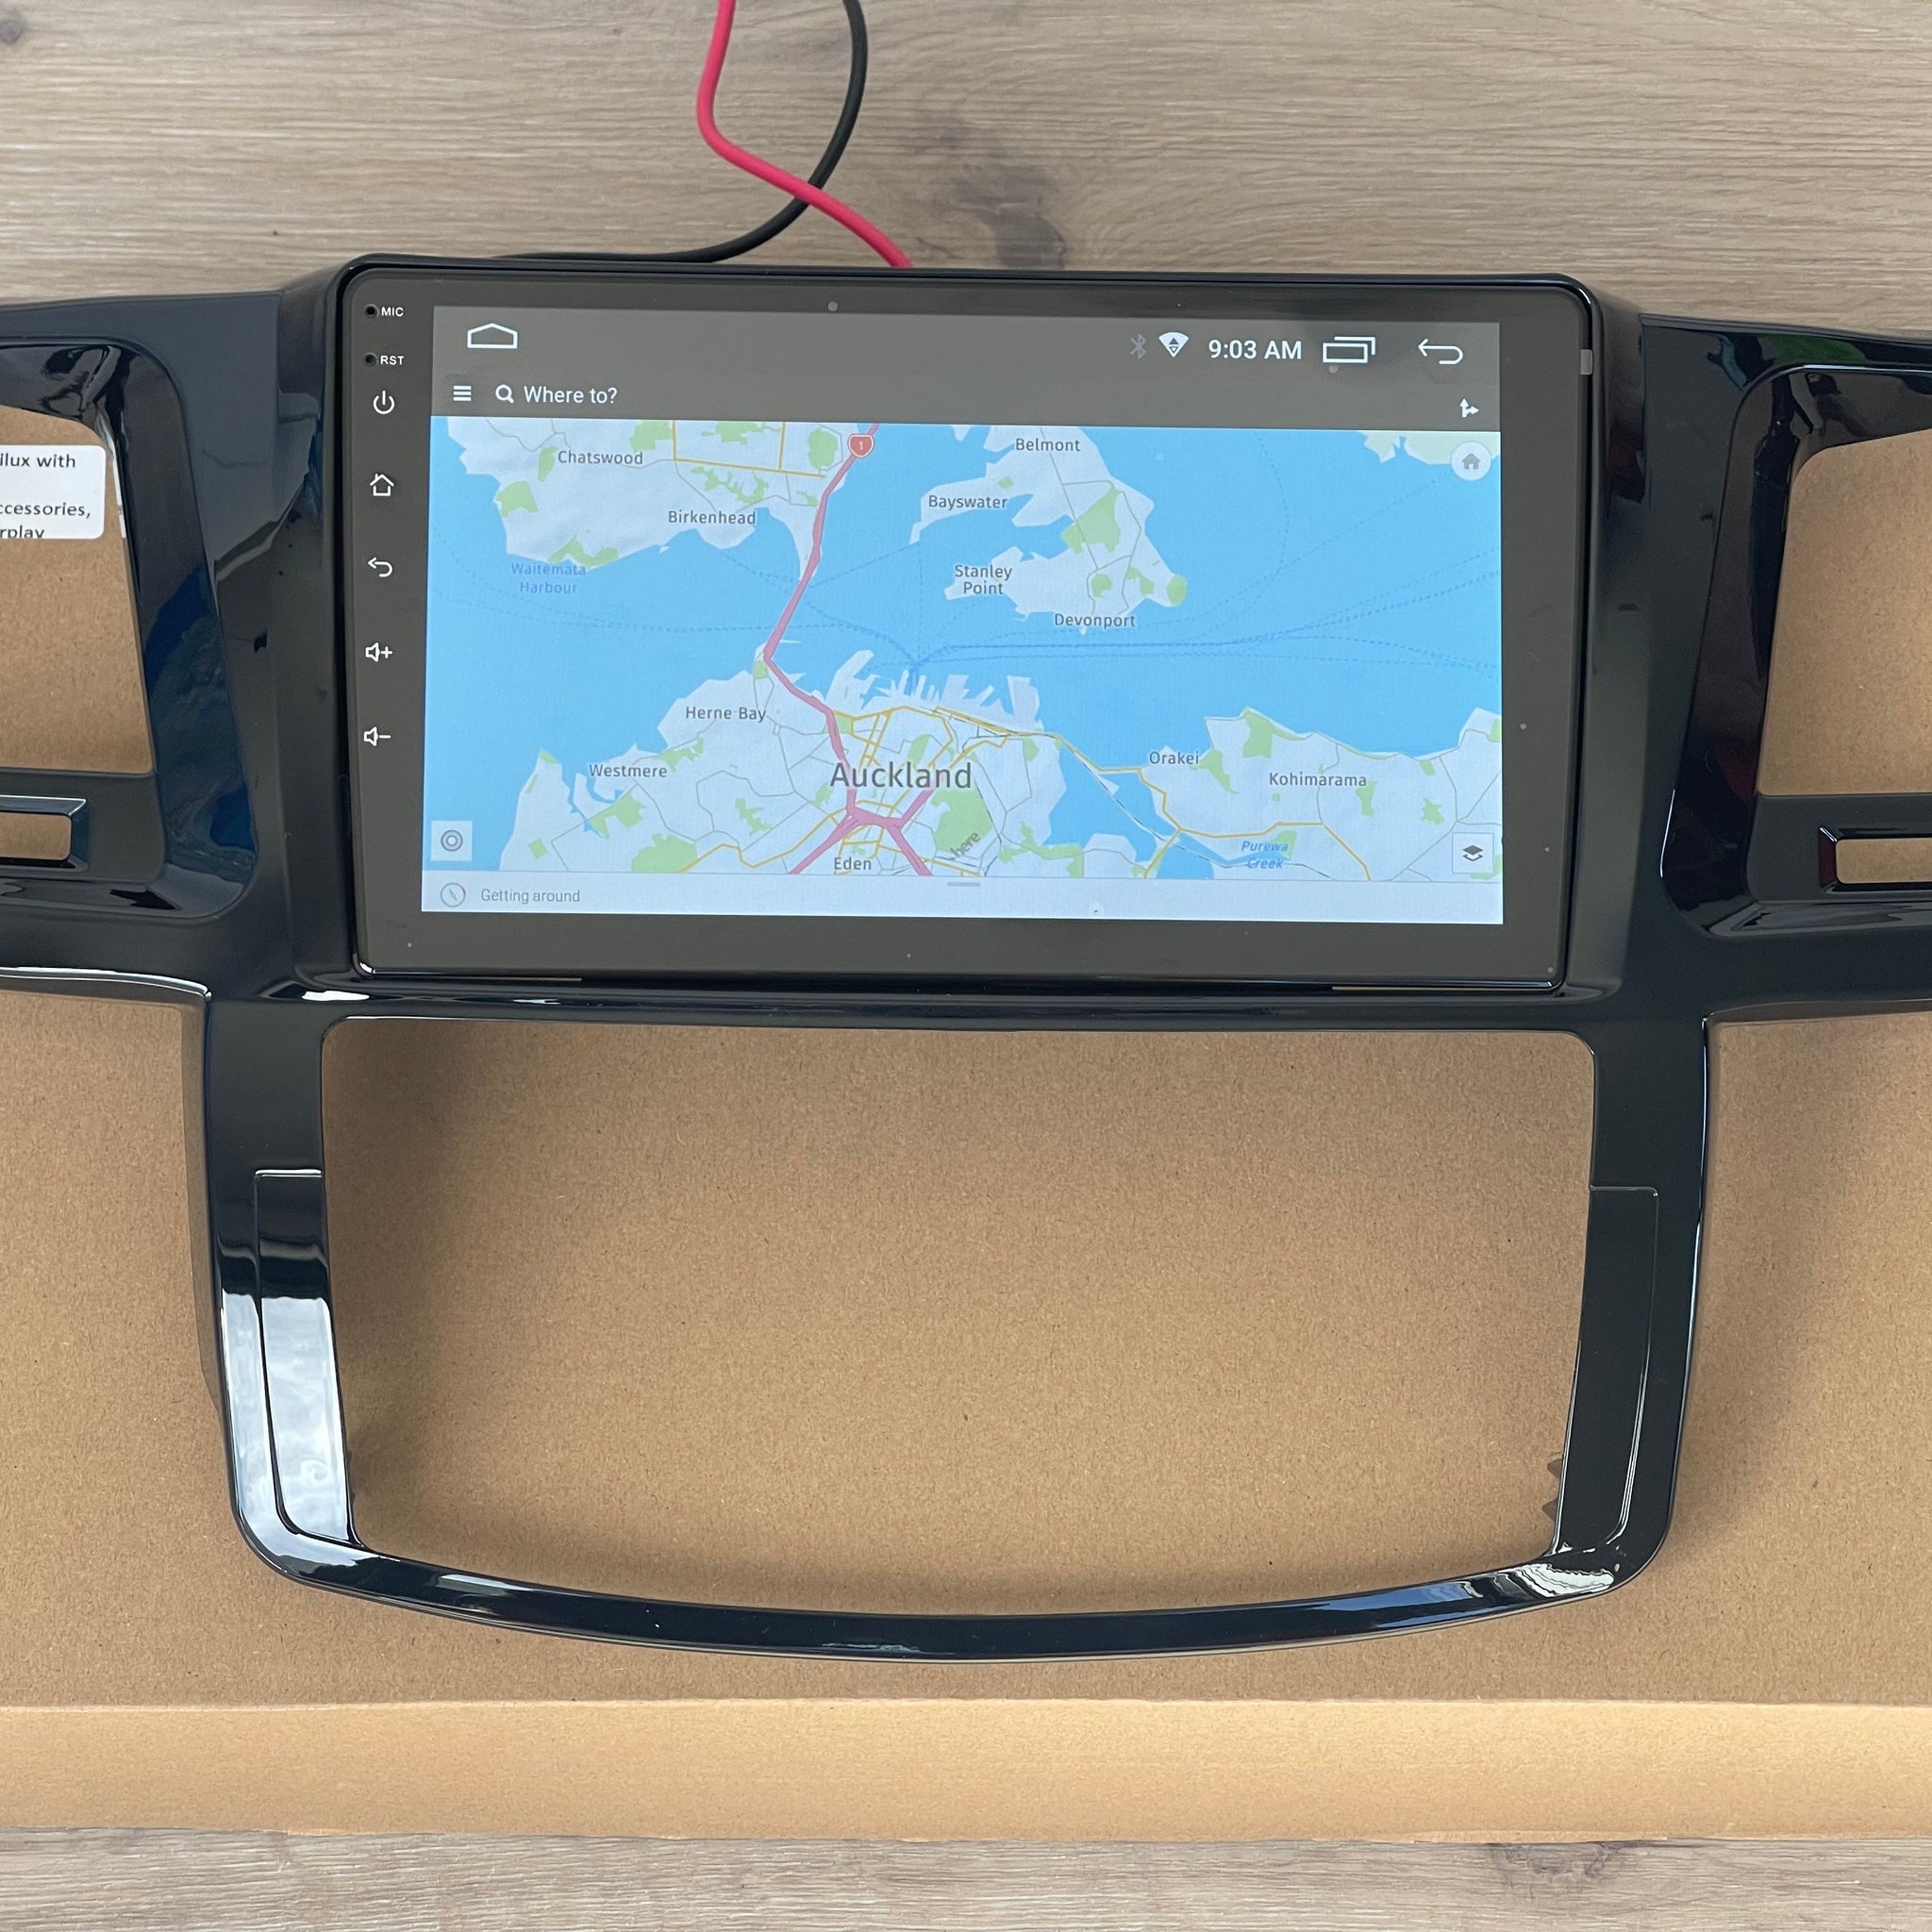 Car Stereo For sr5 SR5 Toyota Hilux N70 9” Supports Apple CarPlay Android Auto Reverse Camera GPS NZ Map Android 12 Radio BT Hands Free Calls GGN15, GGN25, KUN16, KUN26, TGN16 SRS V8 4.0 SR5 dc